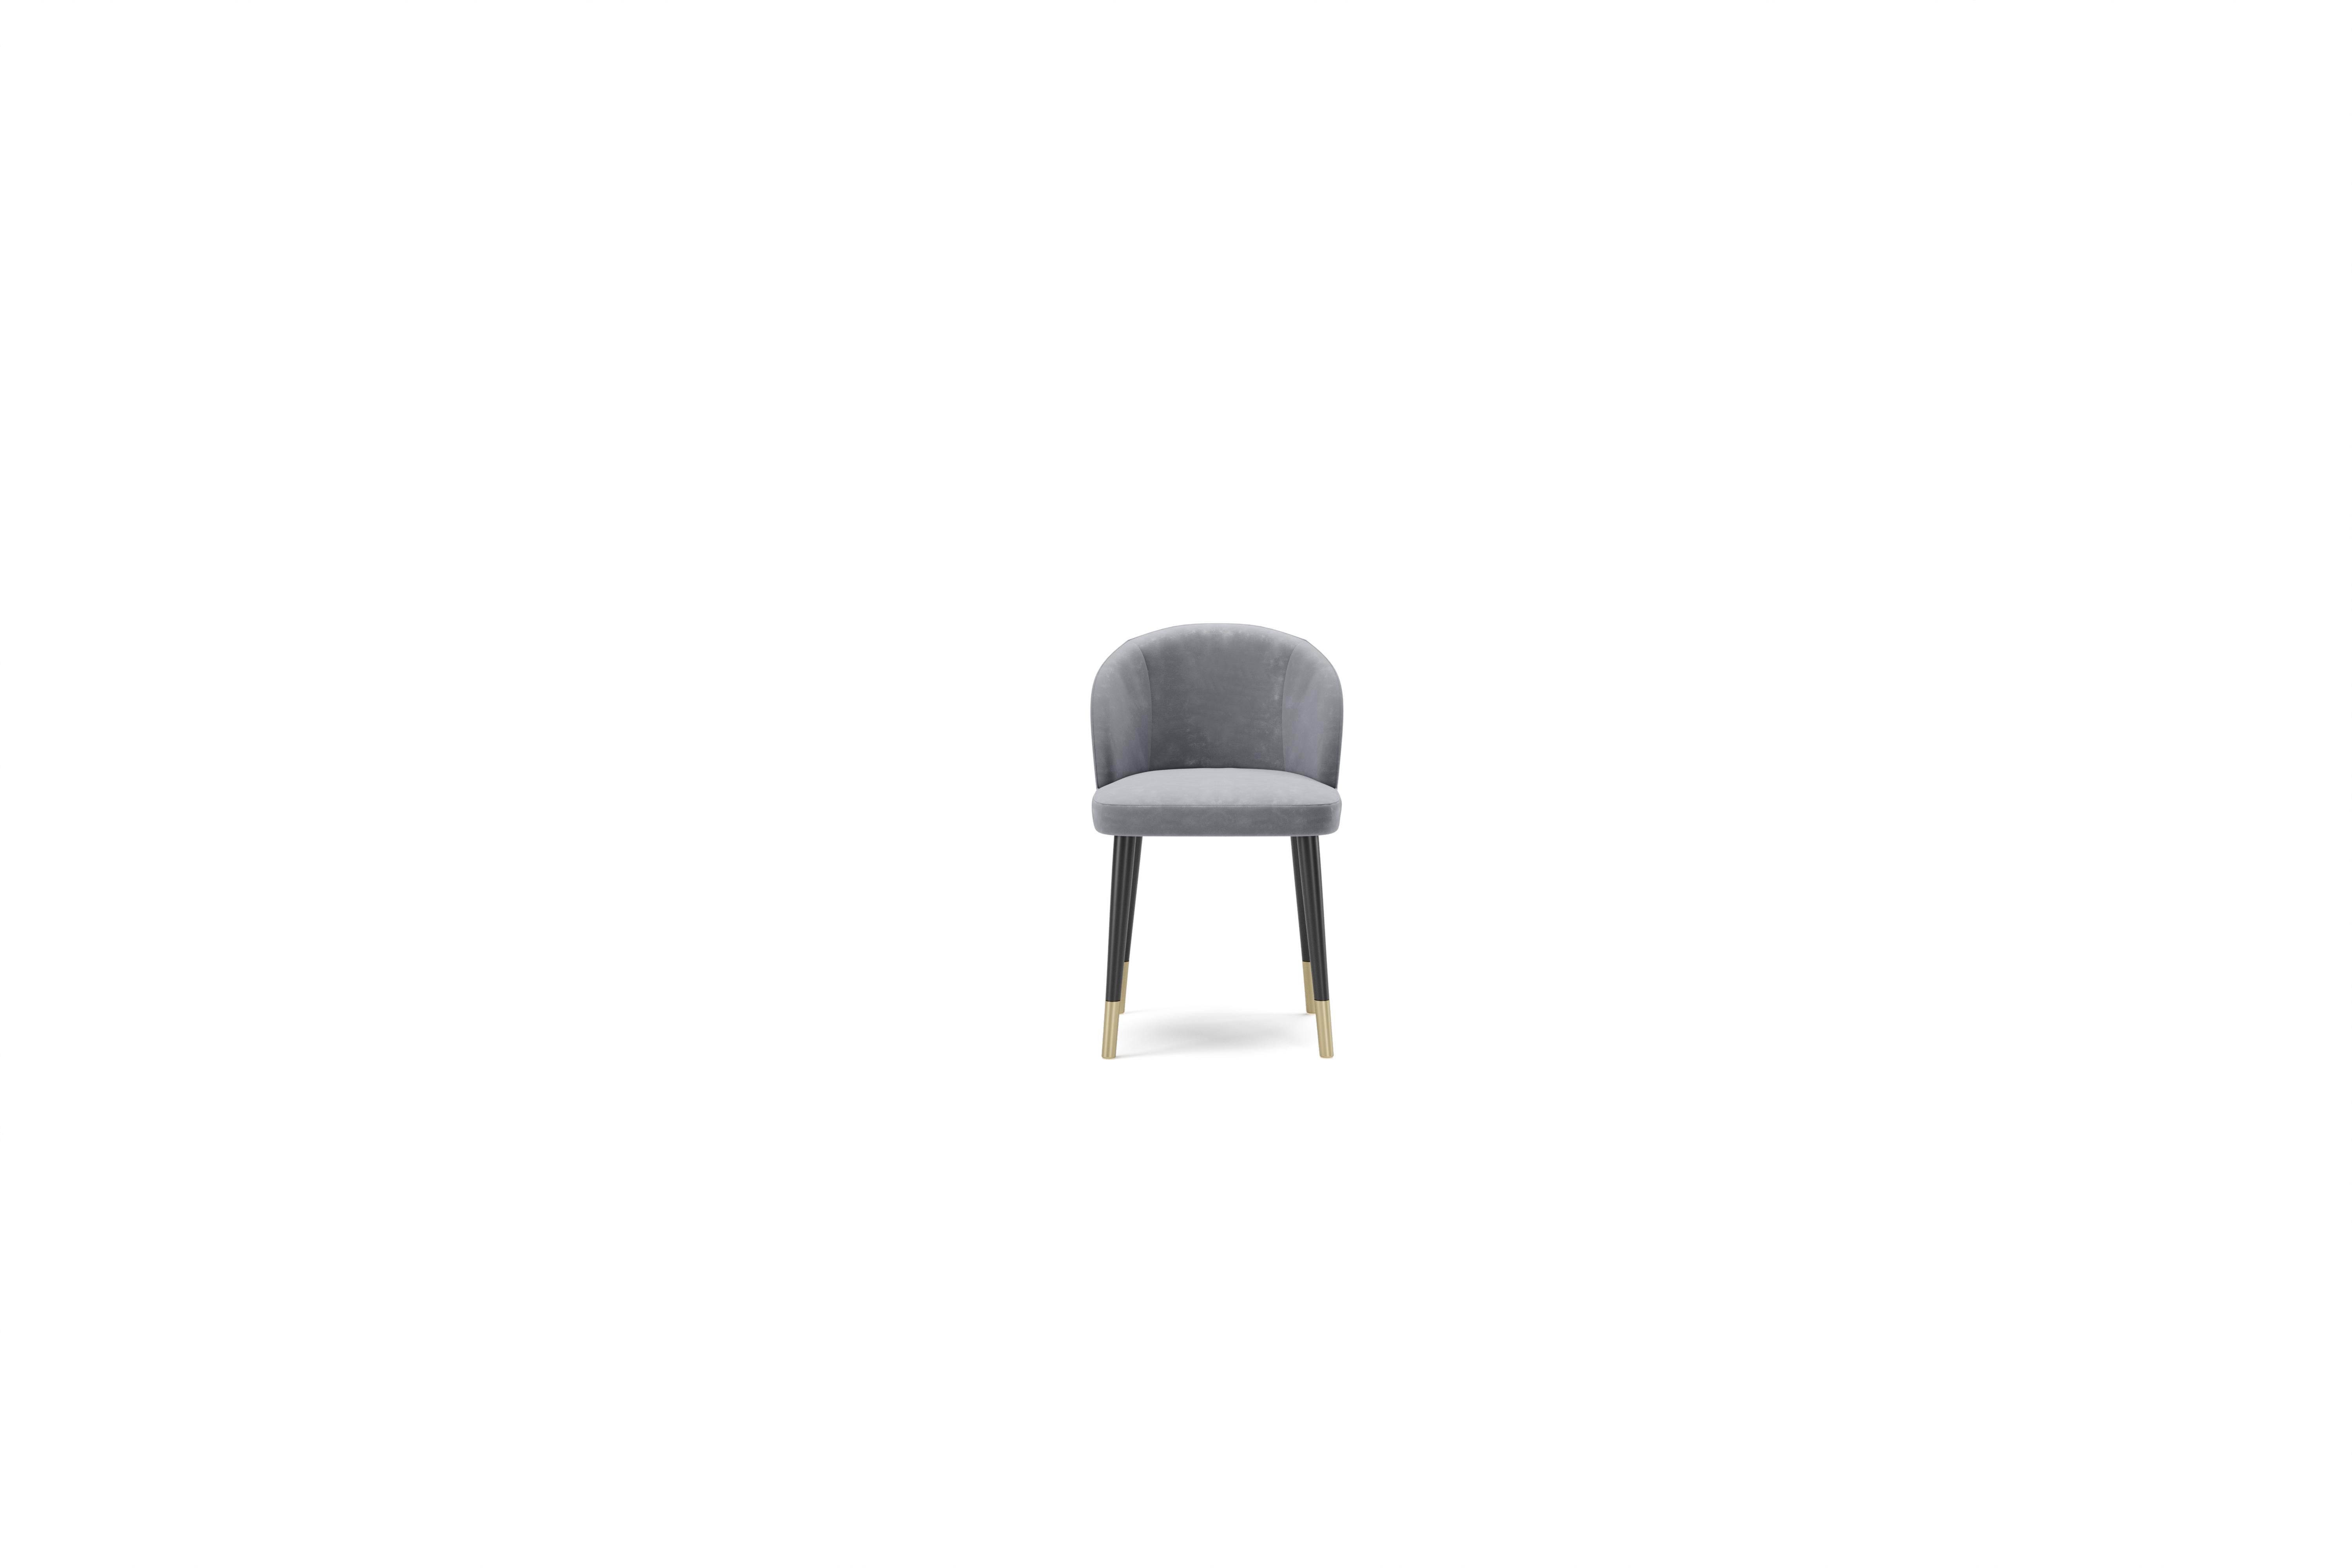 Dalia dining chair, a wood padded structure with multi density foams. The seat has swooden frame with interwooden belts and comes in a velvet, leather or nabuk.

Dalia is available in foreign certifications.

Dalia is part of the 